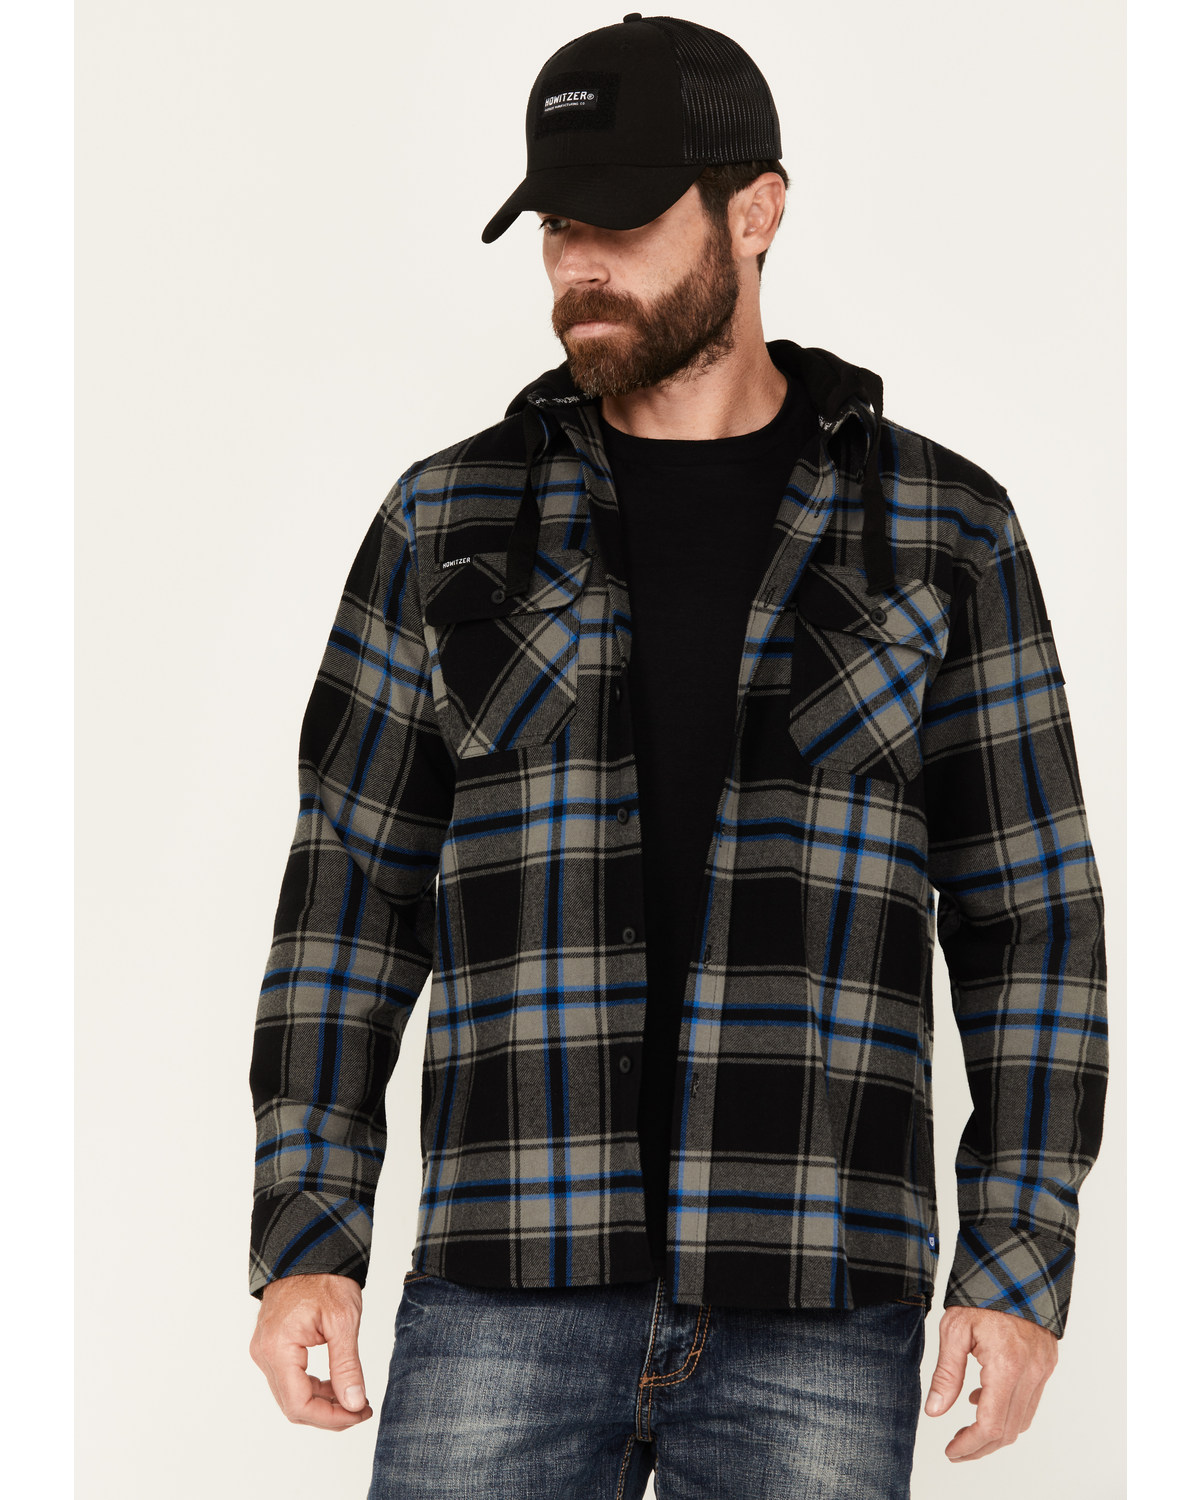 Howitzer Men's Ypres Sherpa Lined Plaid Print Long Sleeve Button-Down Flannel